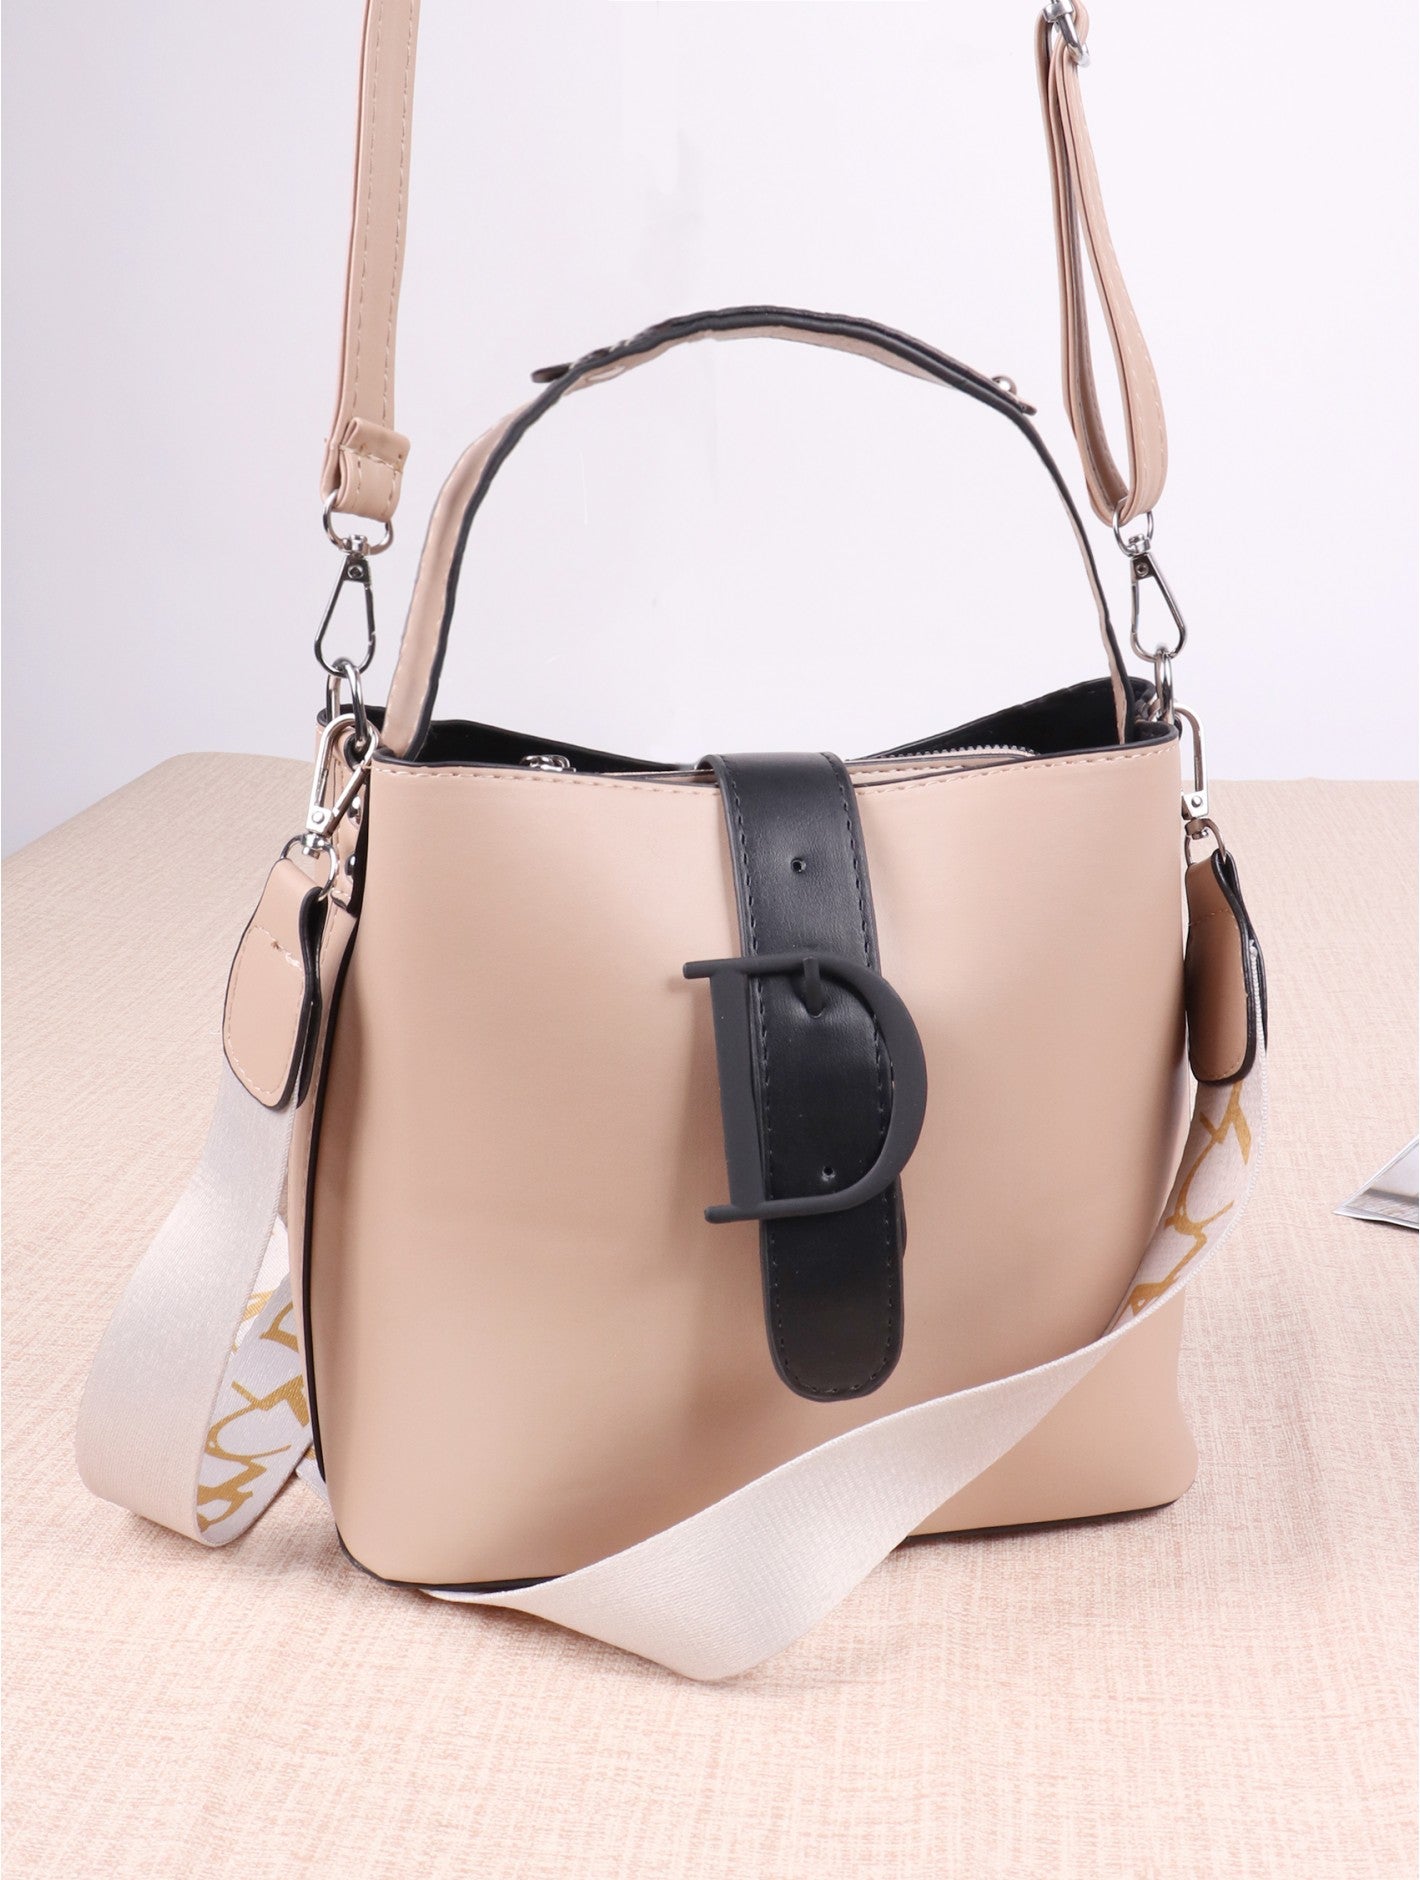 Beige Faux Leather Satchel with Long Strap